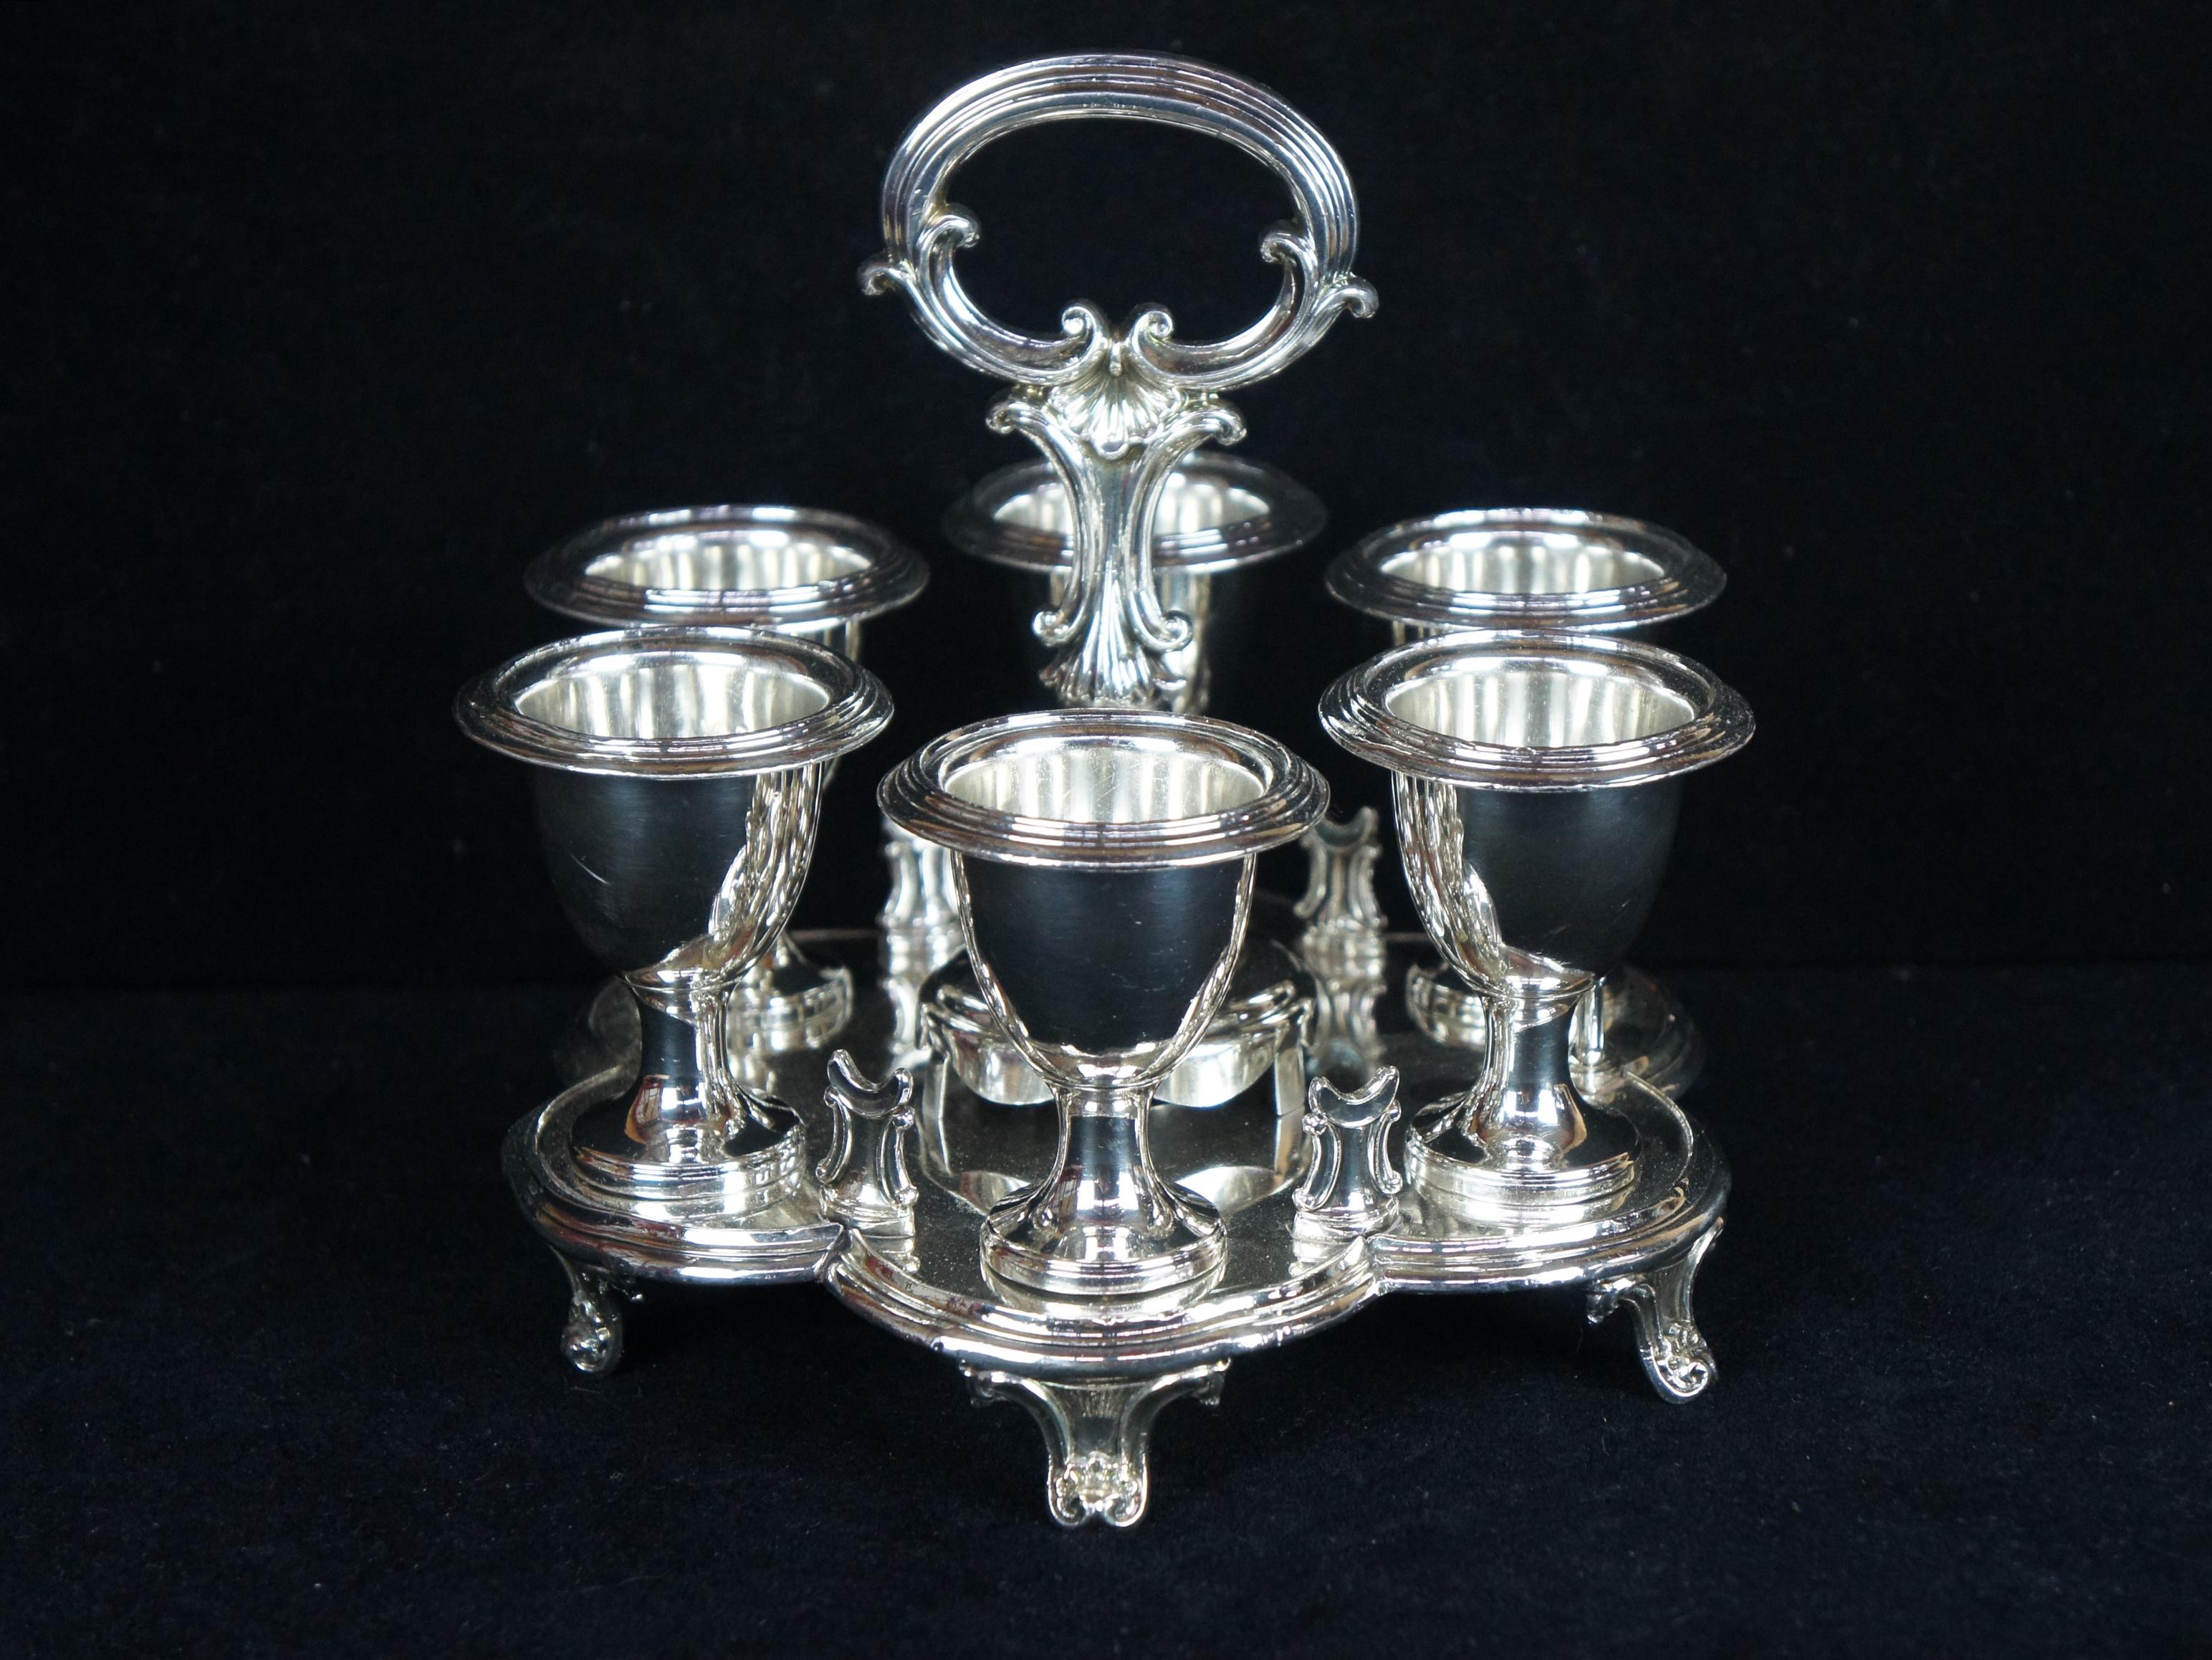 6 Baroque Silver Plated Kiddush Cup Goblets & Caddy Judaica Barware Shot Glasses For Sale 4